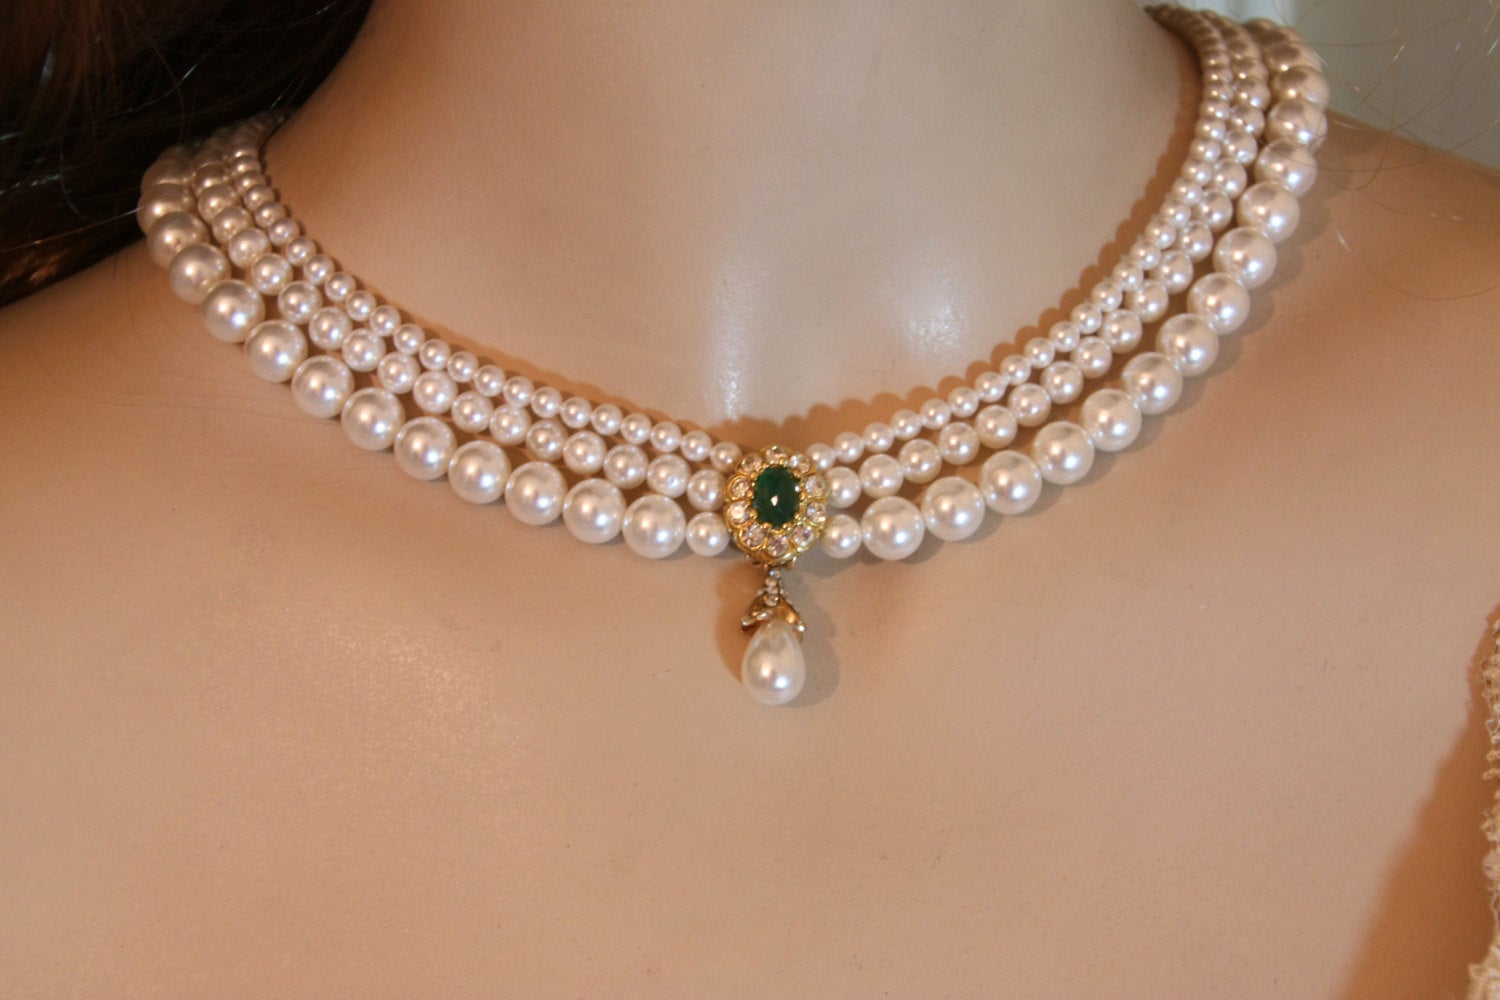 How to Make a Pearl Necklace?